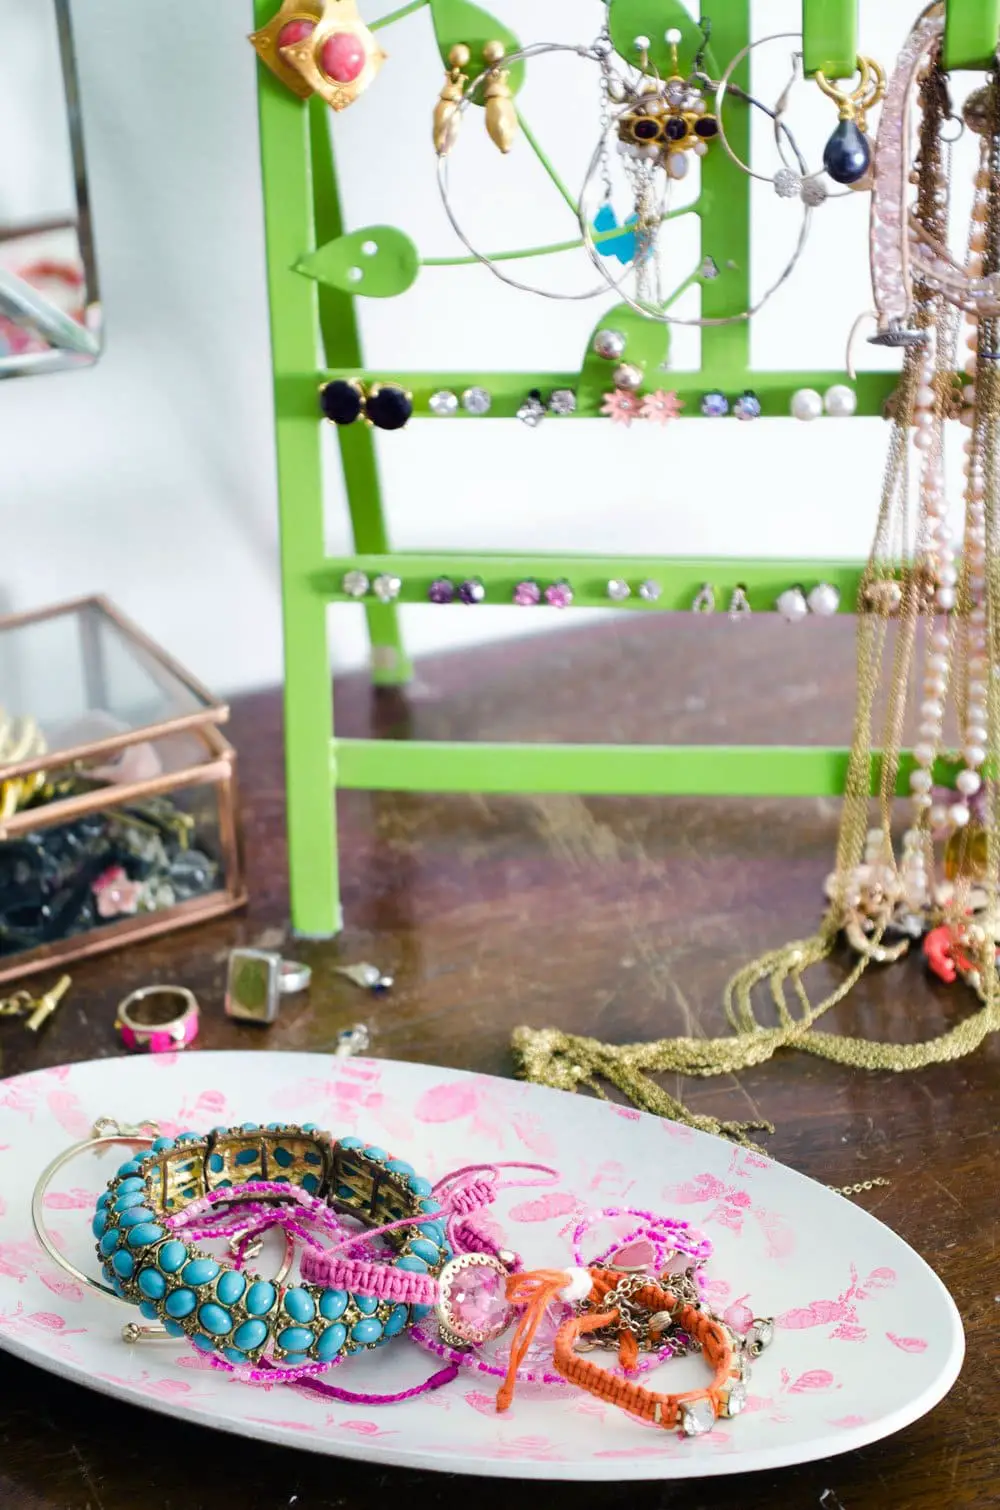 Paint an Ikea serving bowl then stamp it for a fun pattern and a decorative jewelry holder for your dresser.